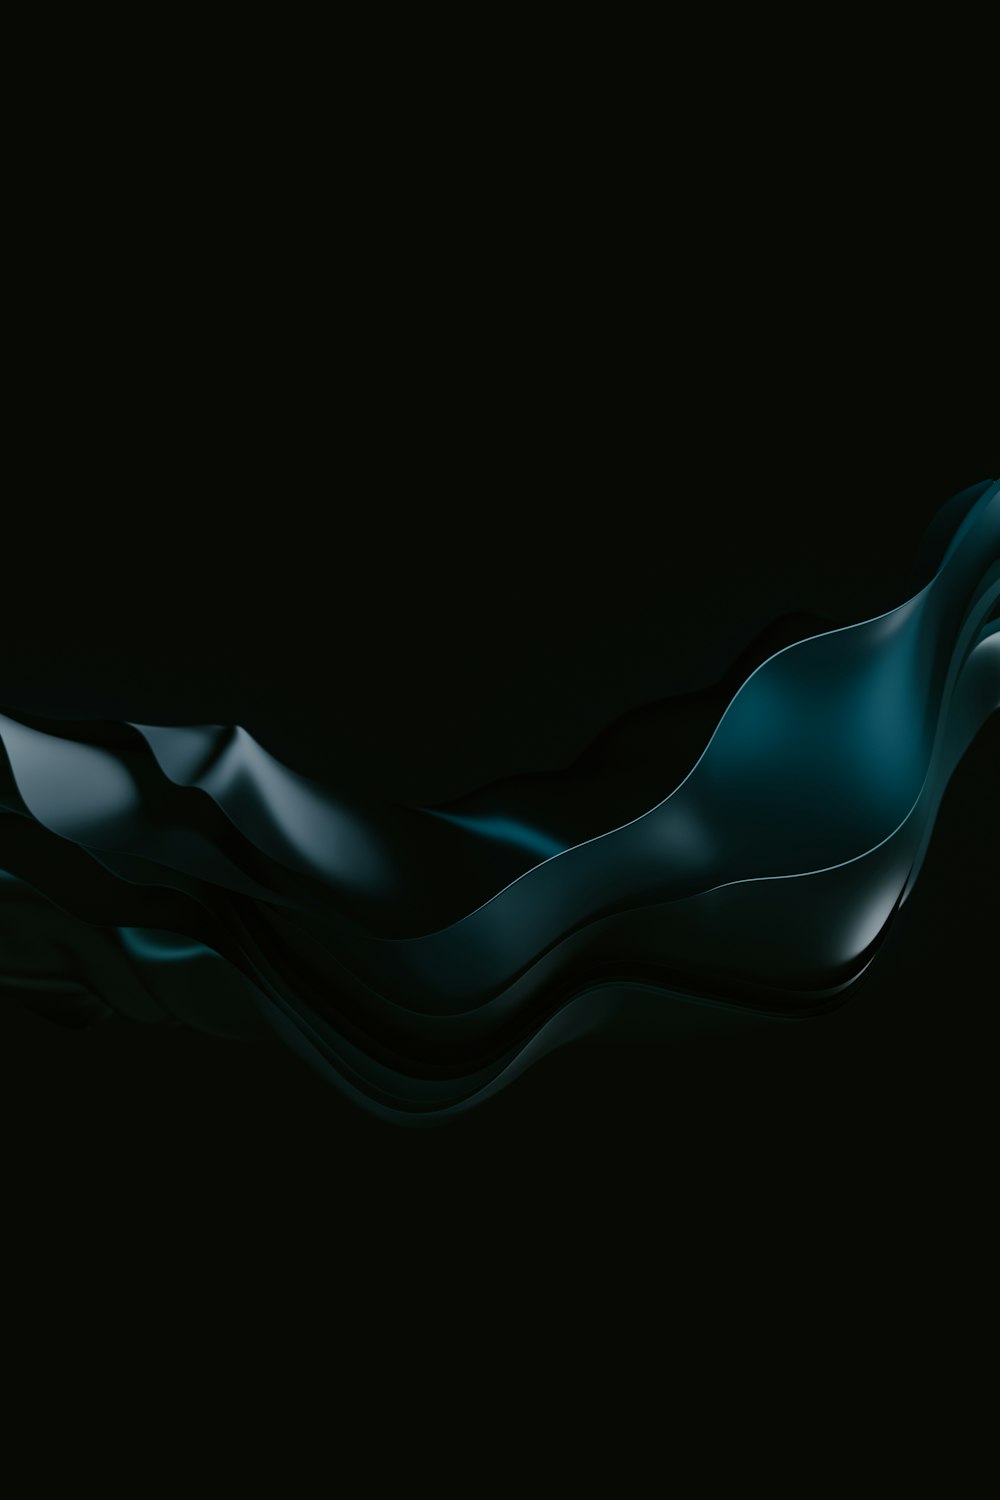 a black background with a wavy design